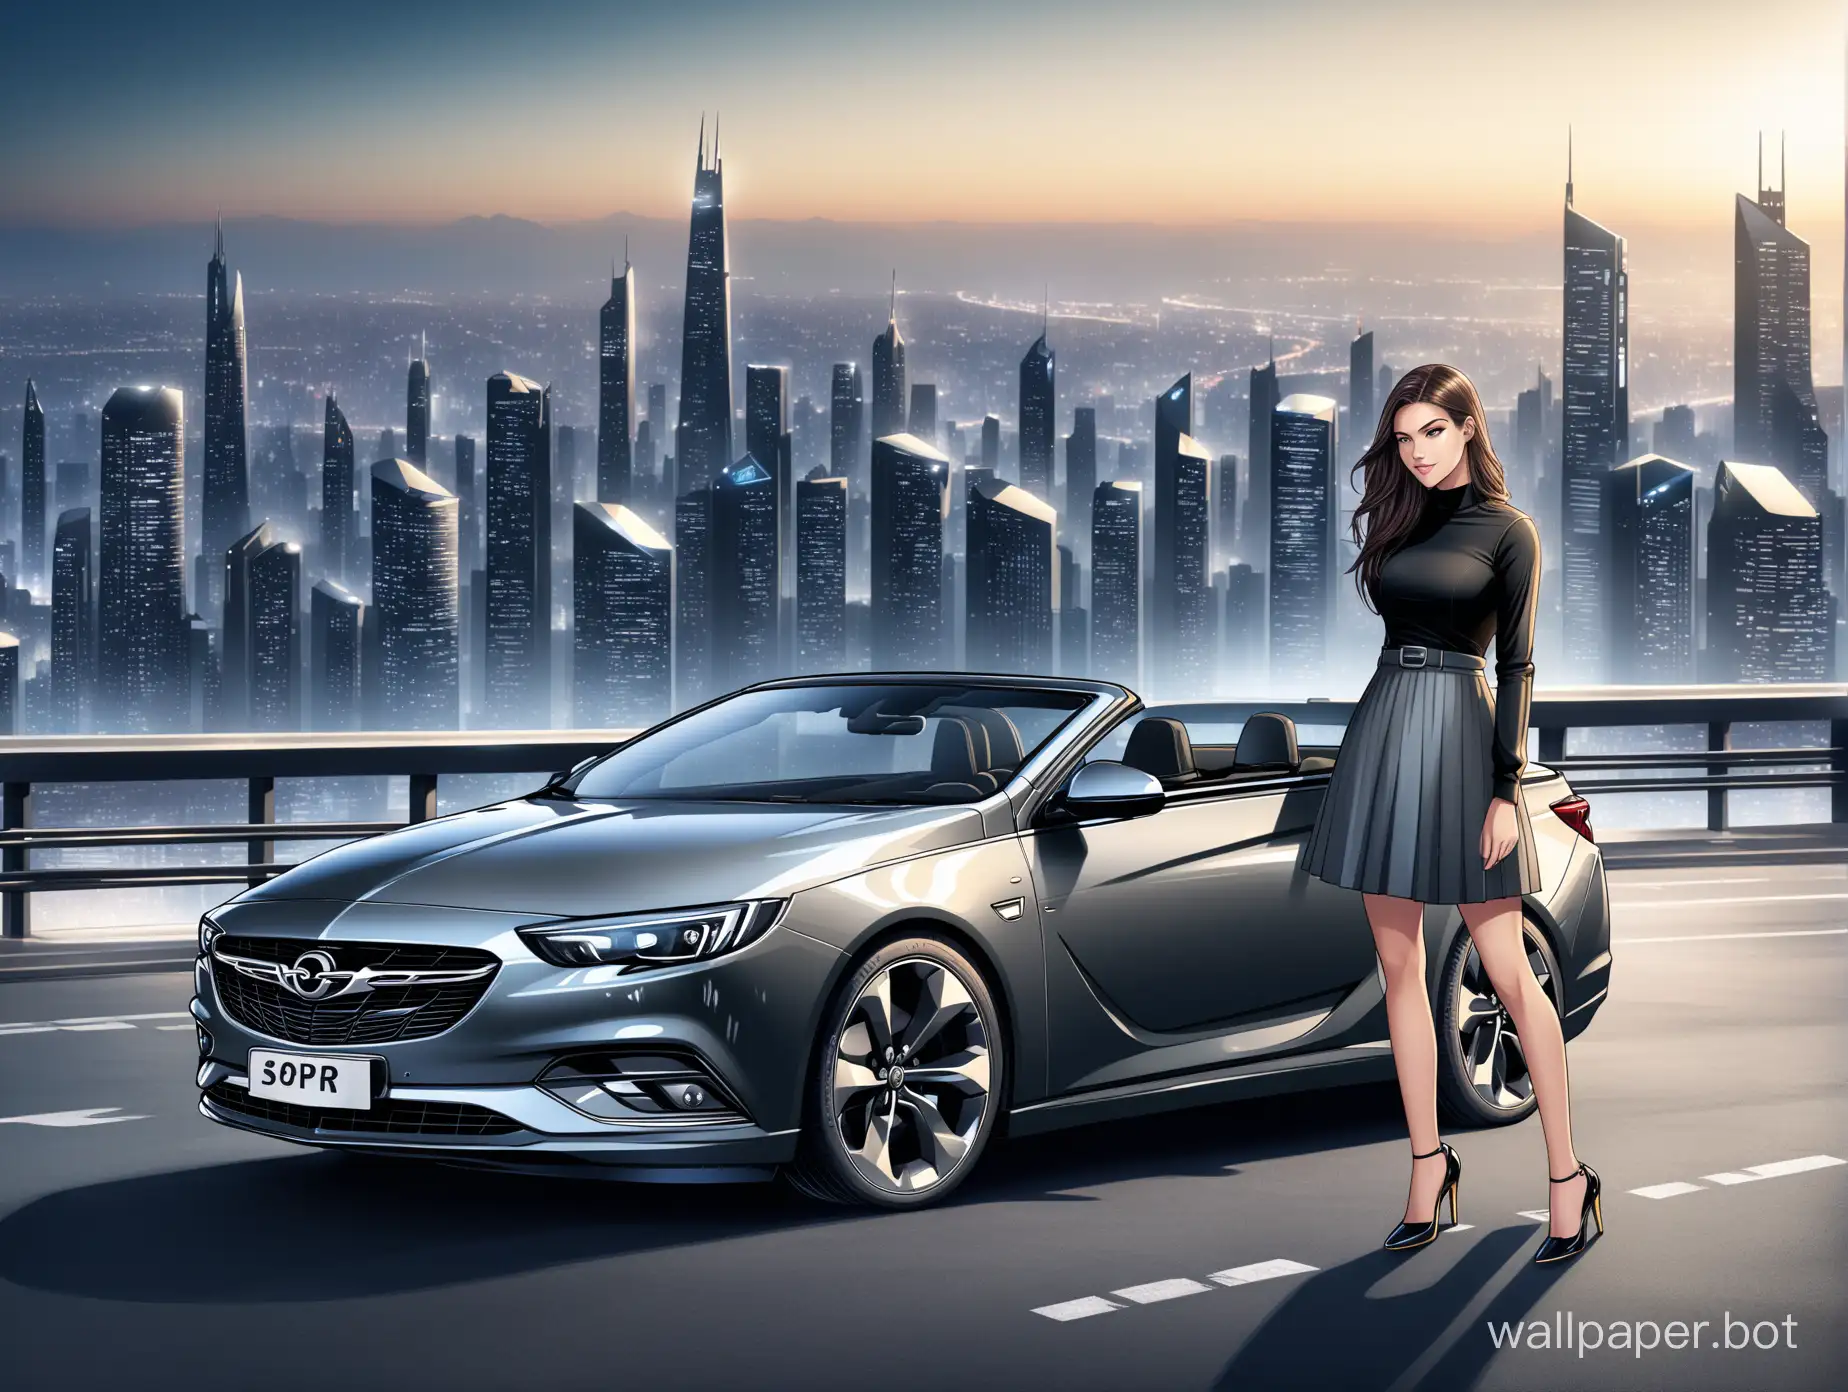 Opel insignia grand sport convertible car in dark grey color with a brunette girl in skirt, high heels standing next to it, with futuristic city background and a batman logo